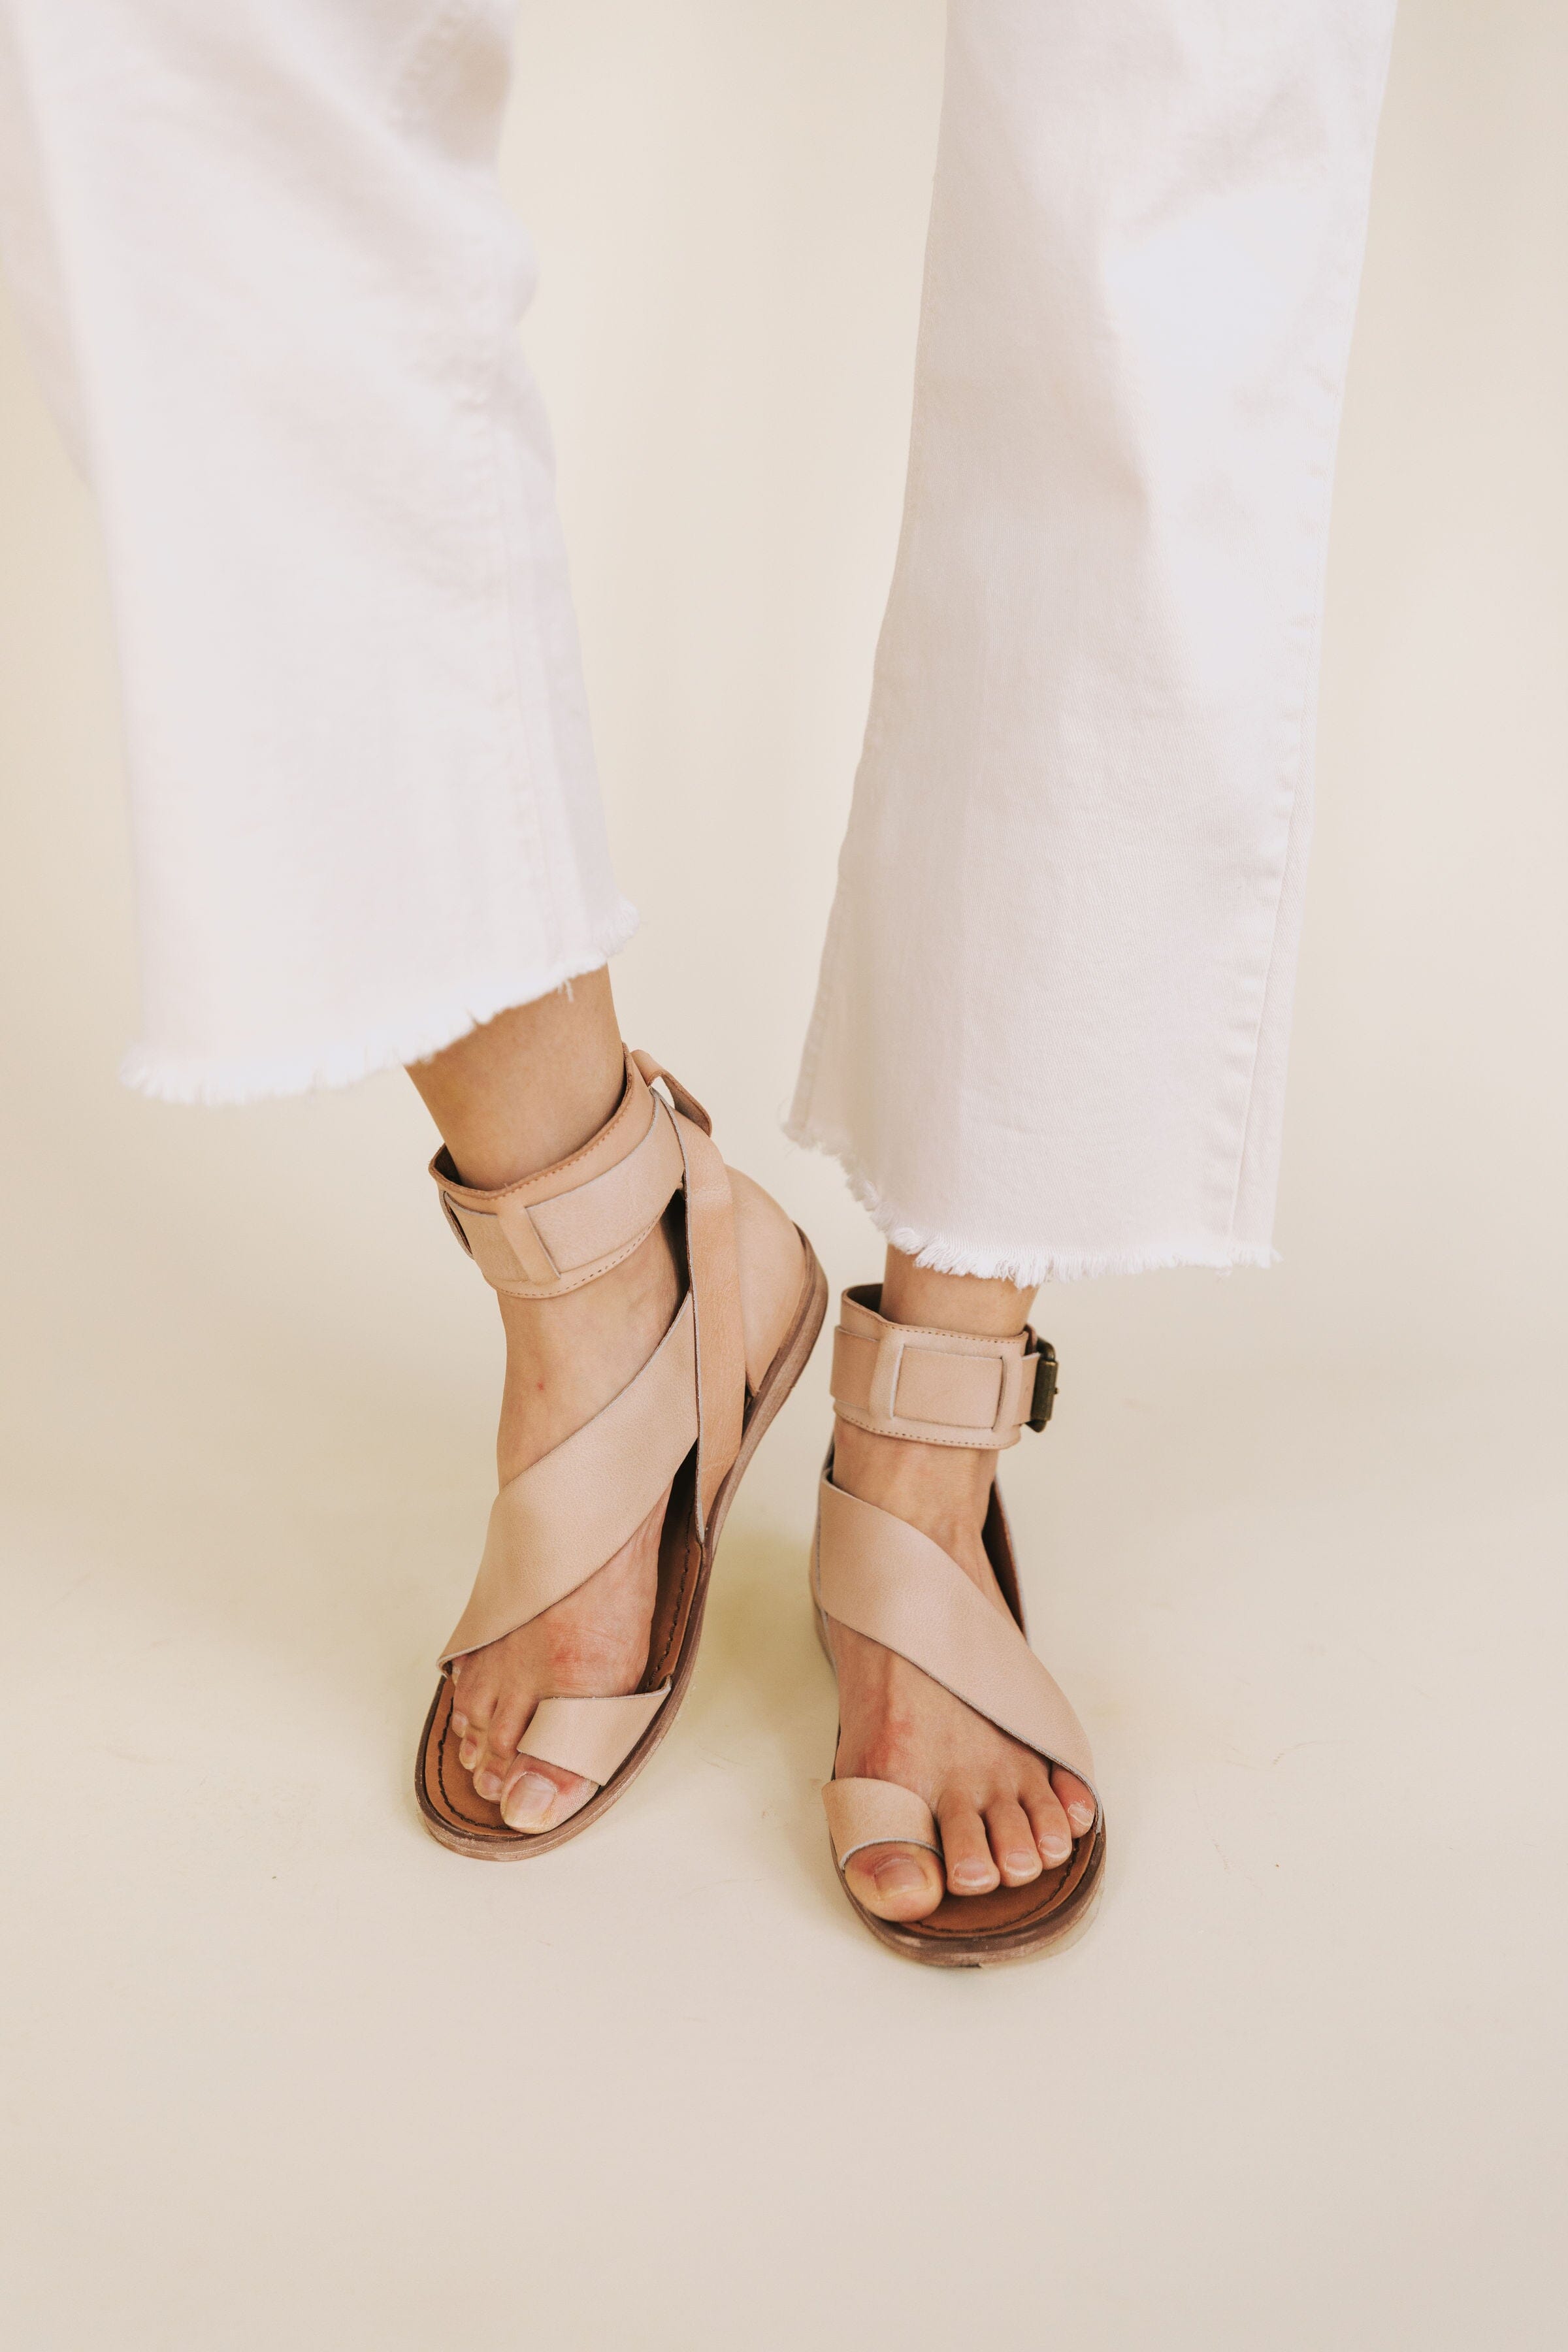 FREE PEOPLE - Vale Boot Sandals